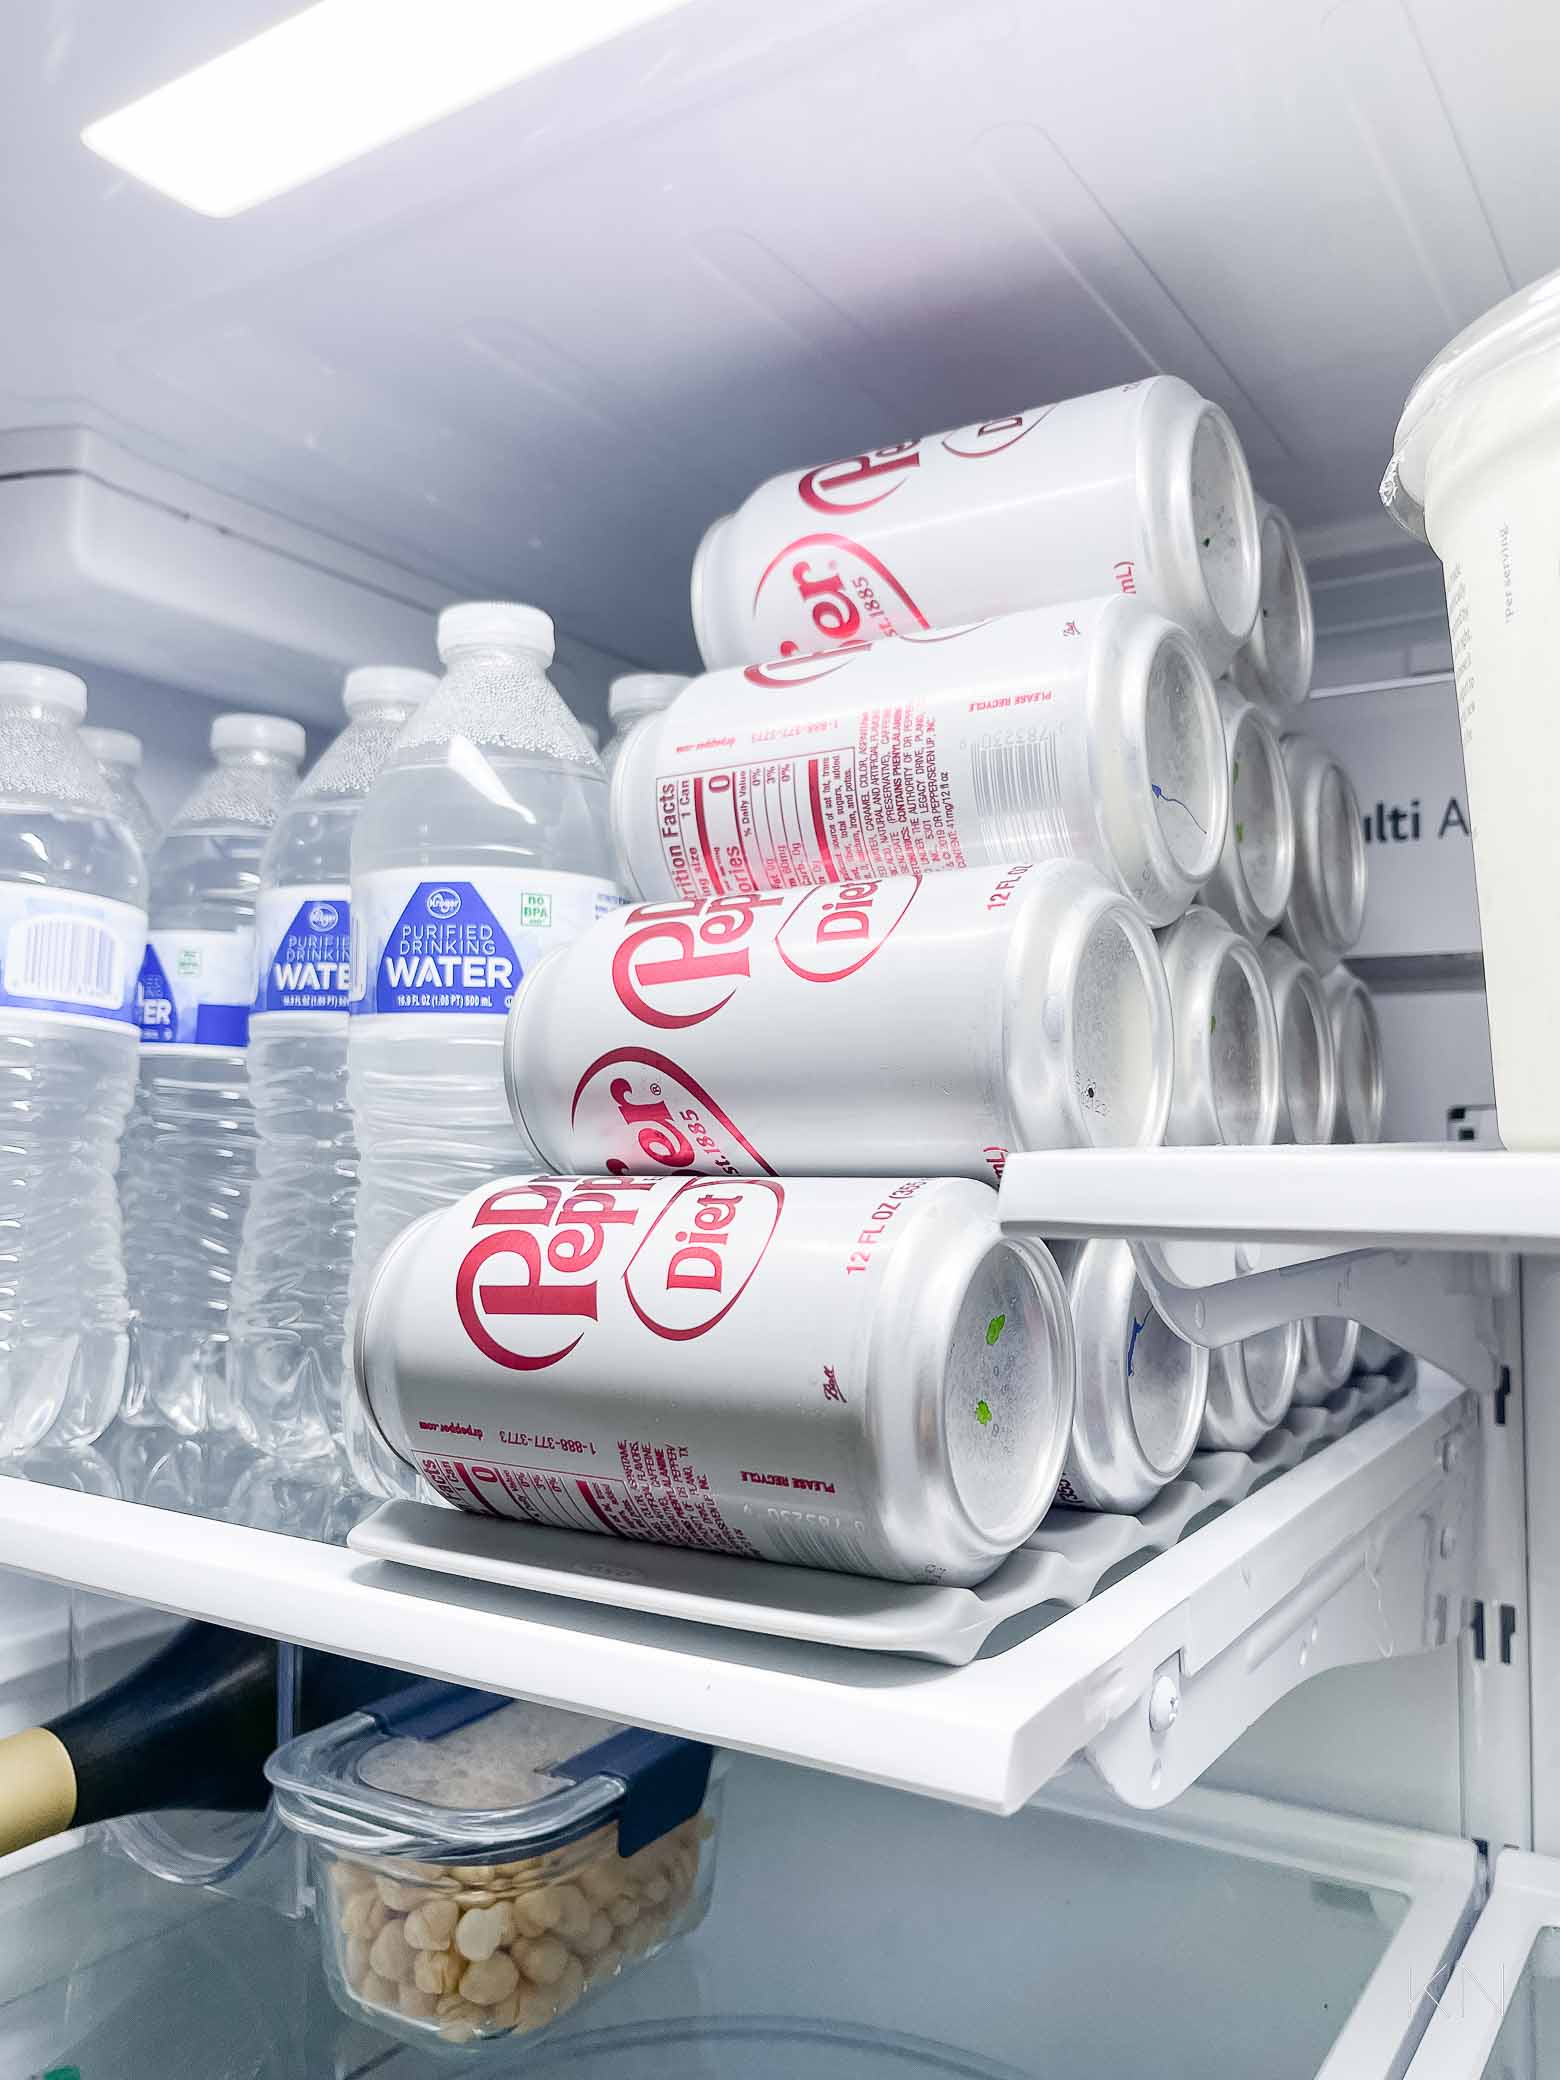 How to Organize Cans In a Fridge